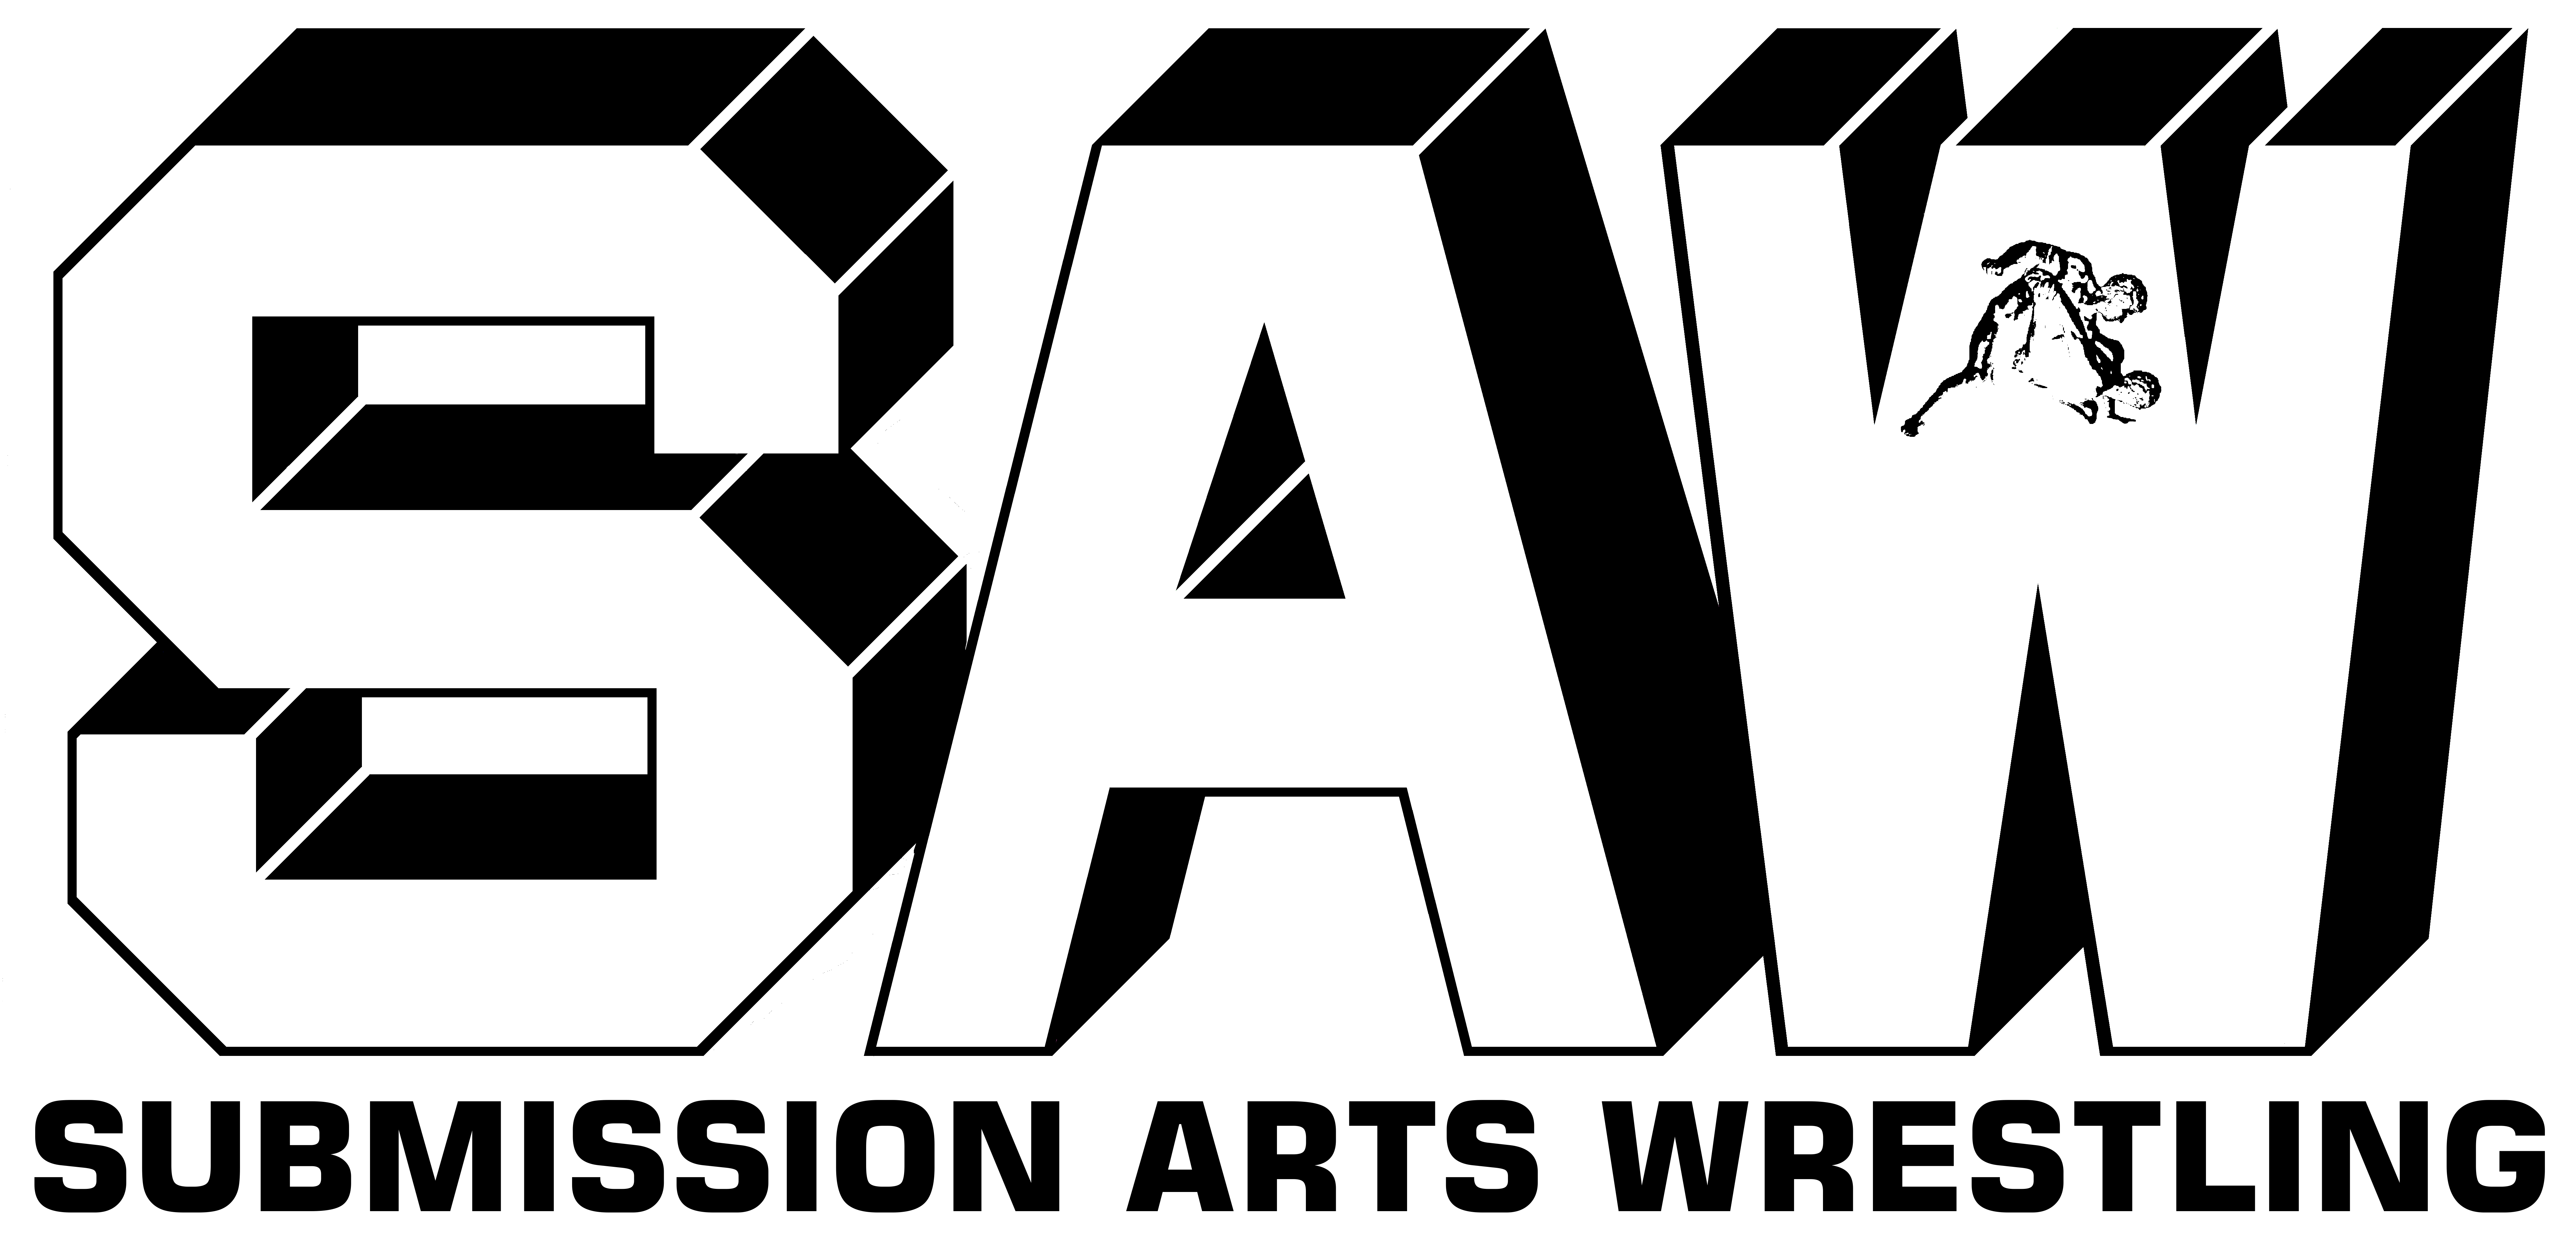 Submission Arts Wrestling